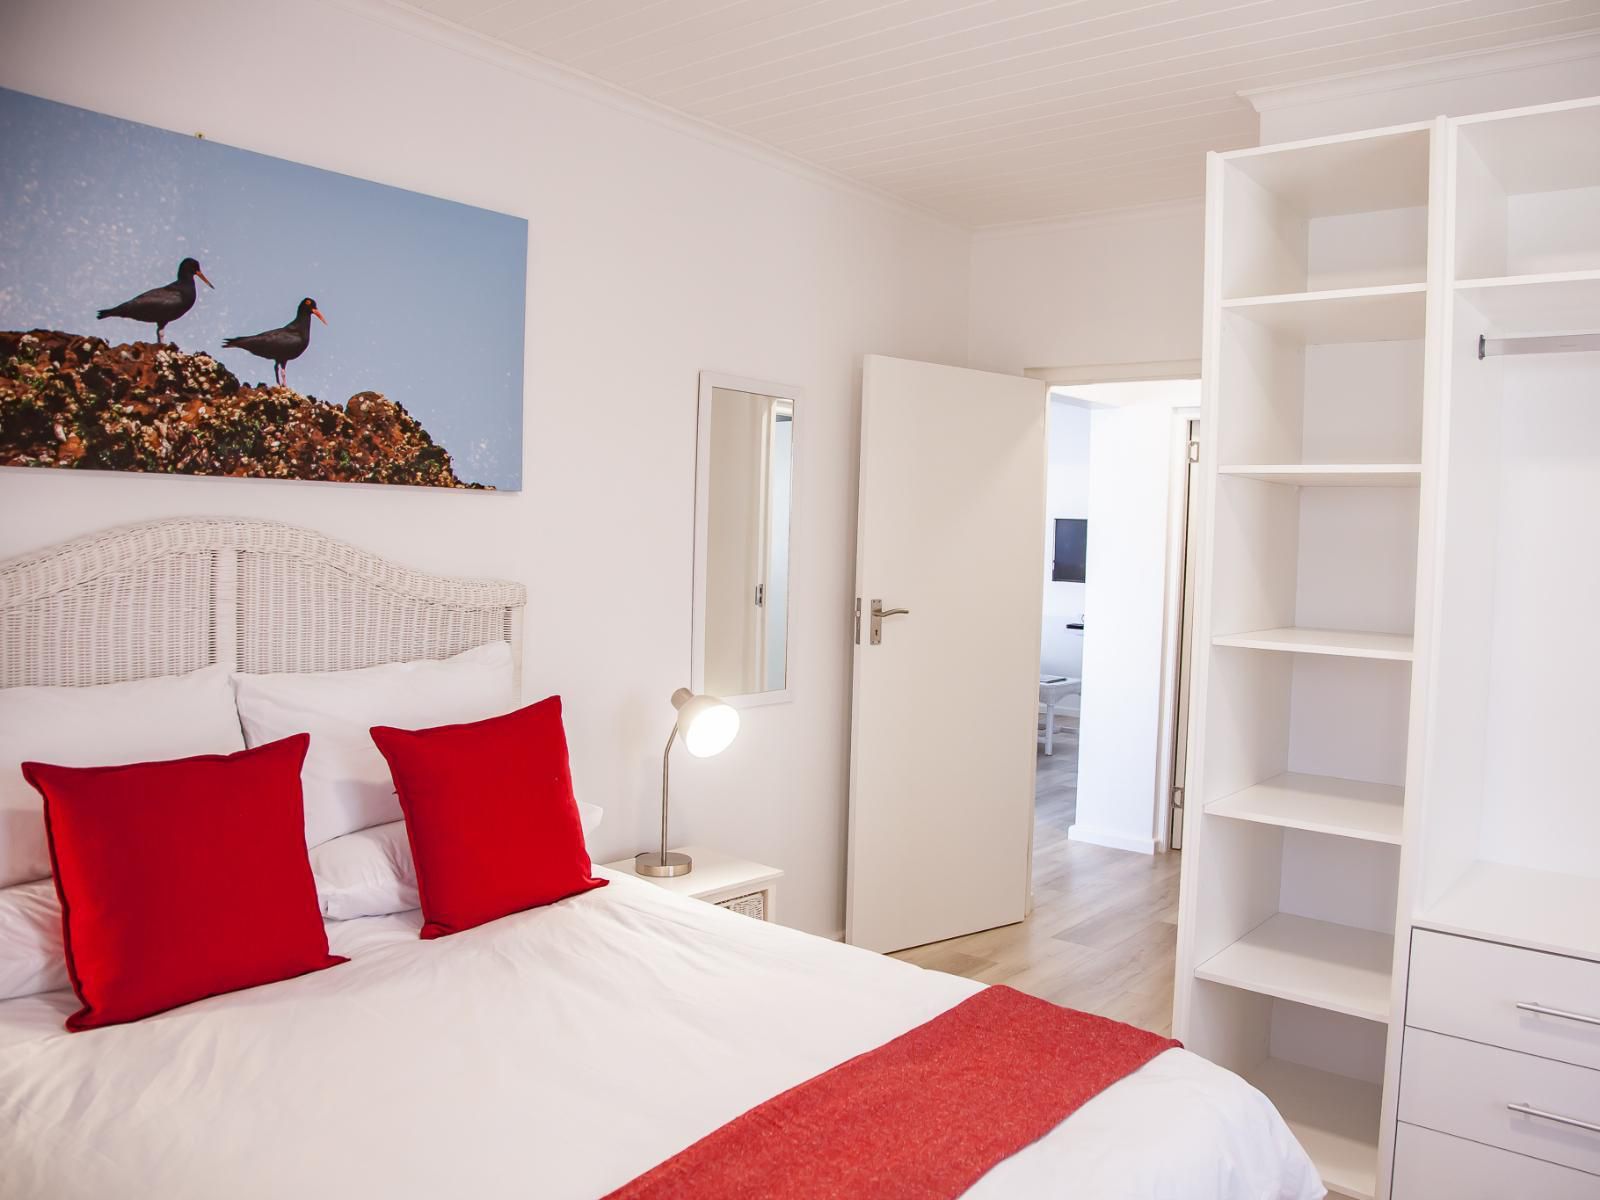 Simply Yzer Self Catering Apartments Yzerfontein Western Cape South Africa Bedroom